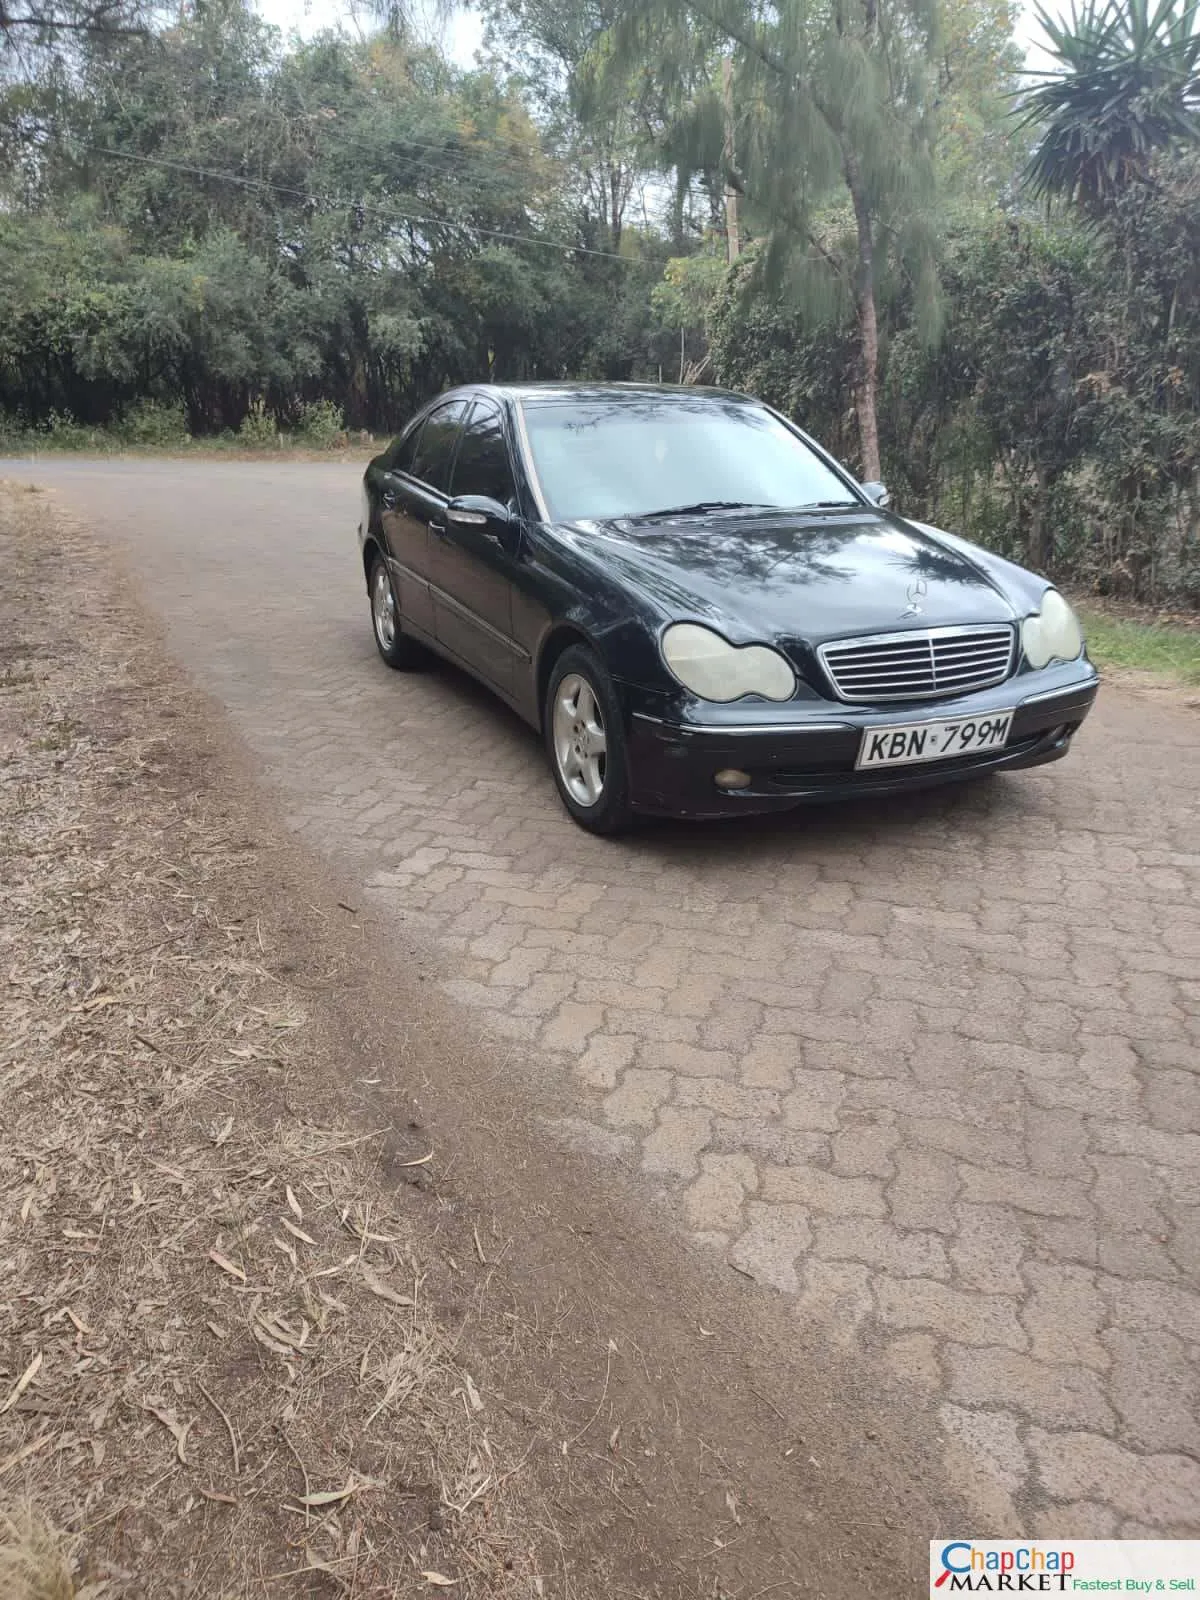 Mercedes Benz C200 for sale in Kenya QUICK SALE 🔥 You Pay 30% DEPOSIT Trade in OK EXCLUSIVE HIRE PURCHASE INSTALLMENTS